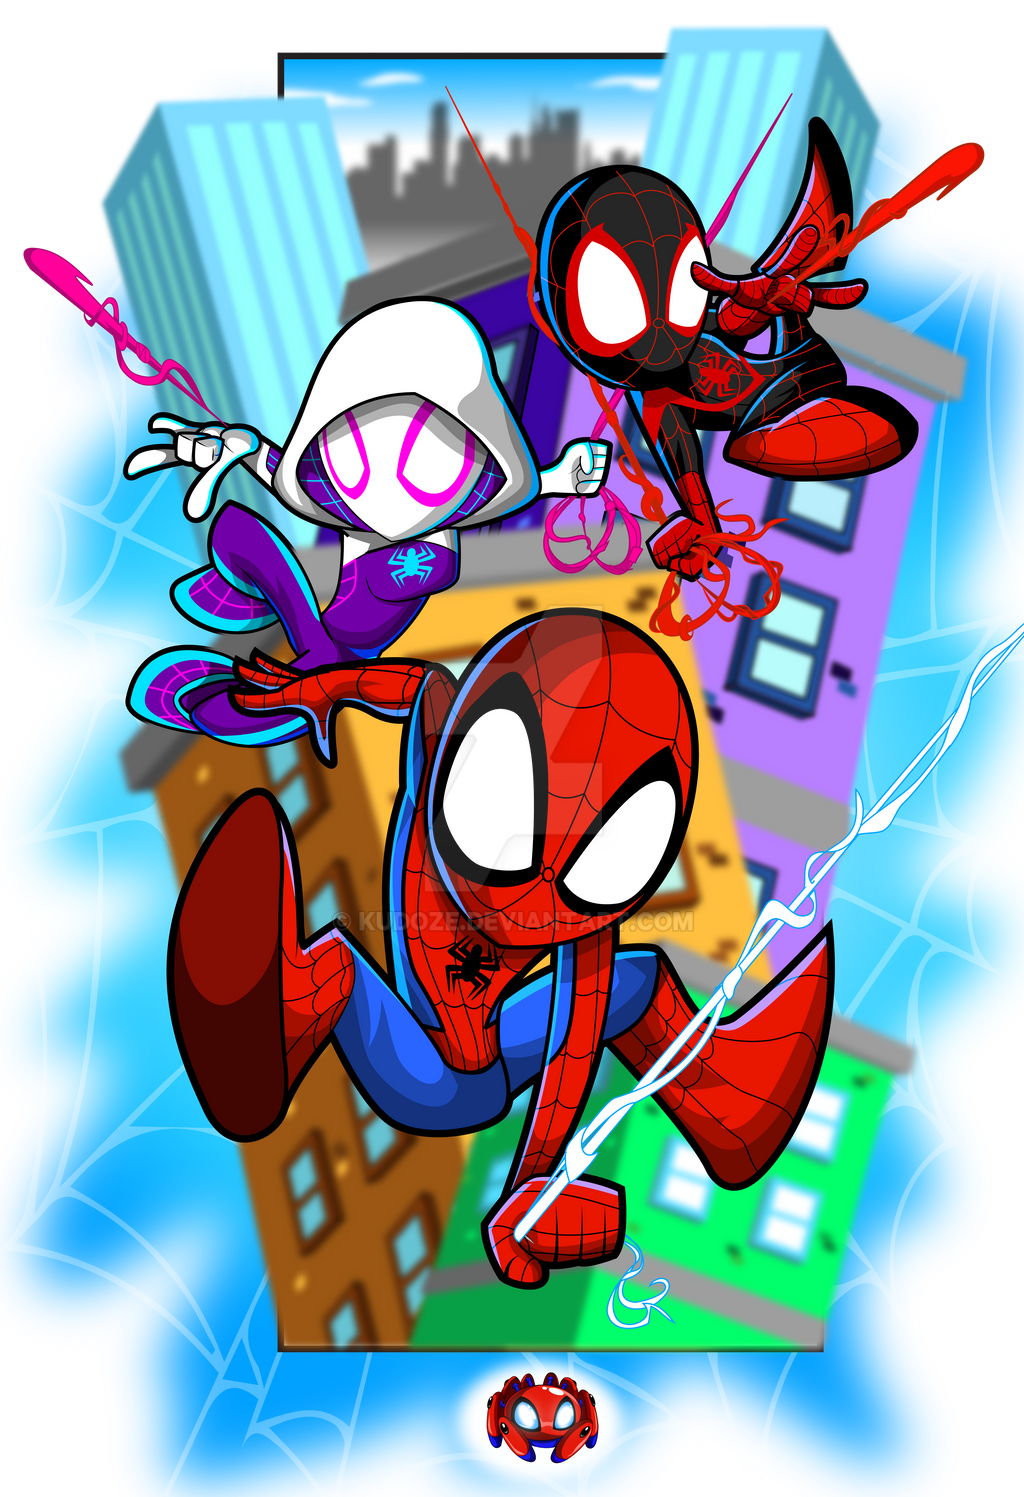 Spidey And His Amazing Friends by kudoze on DeviantArt